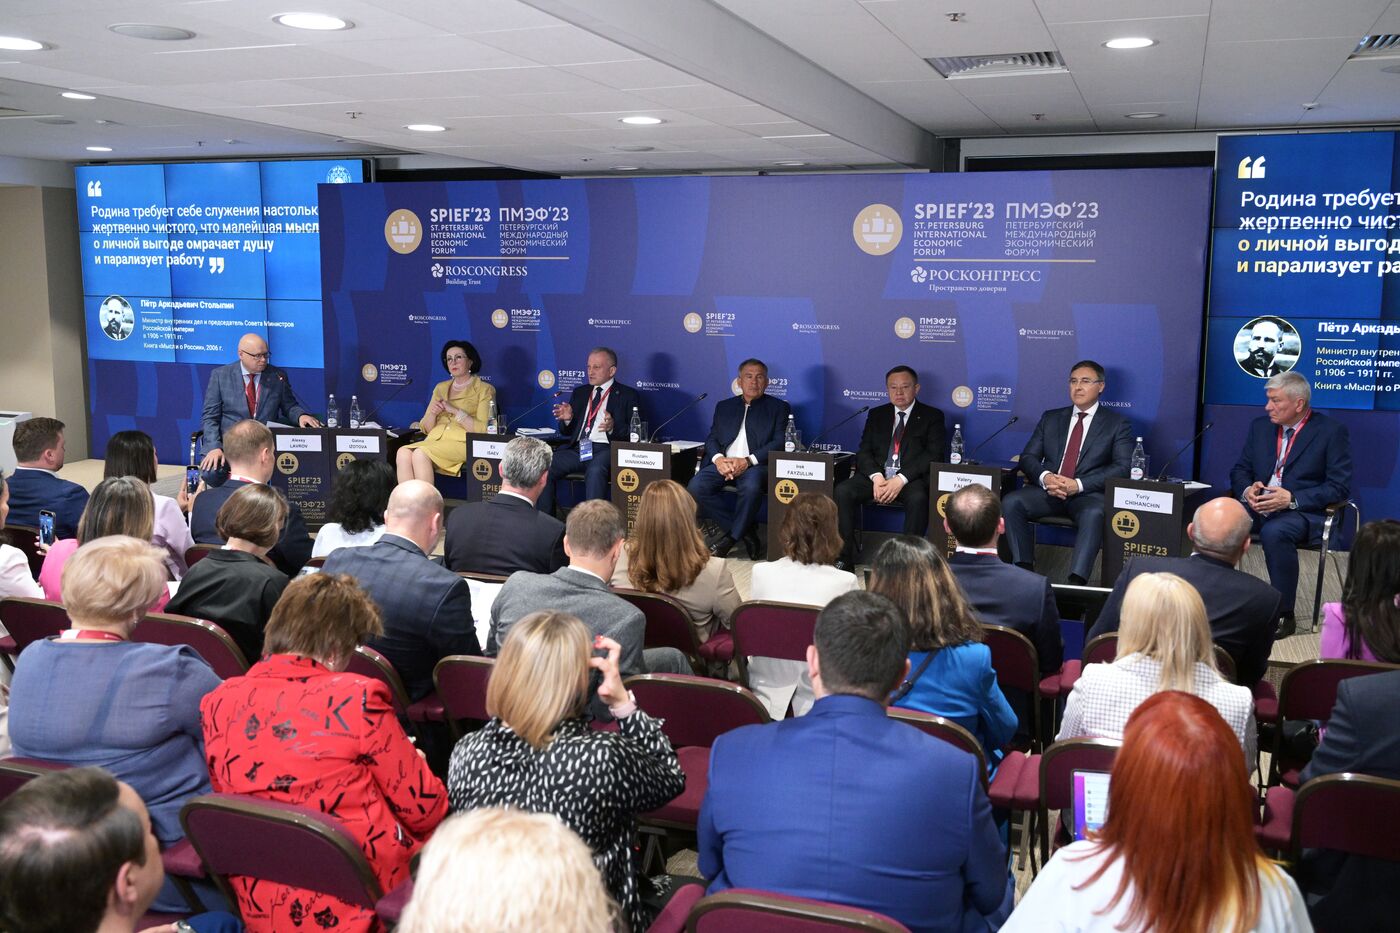 SPIEF-2023. The Russian Finance Ministry’s Internal Control Bodies Celebrate Turning 100: A Dialogue About the Future